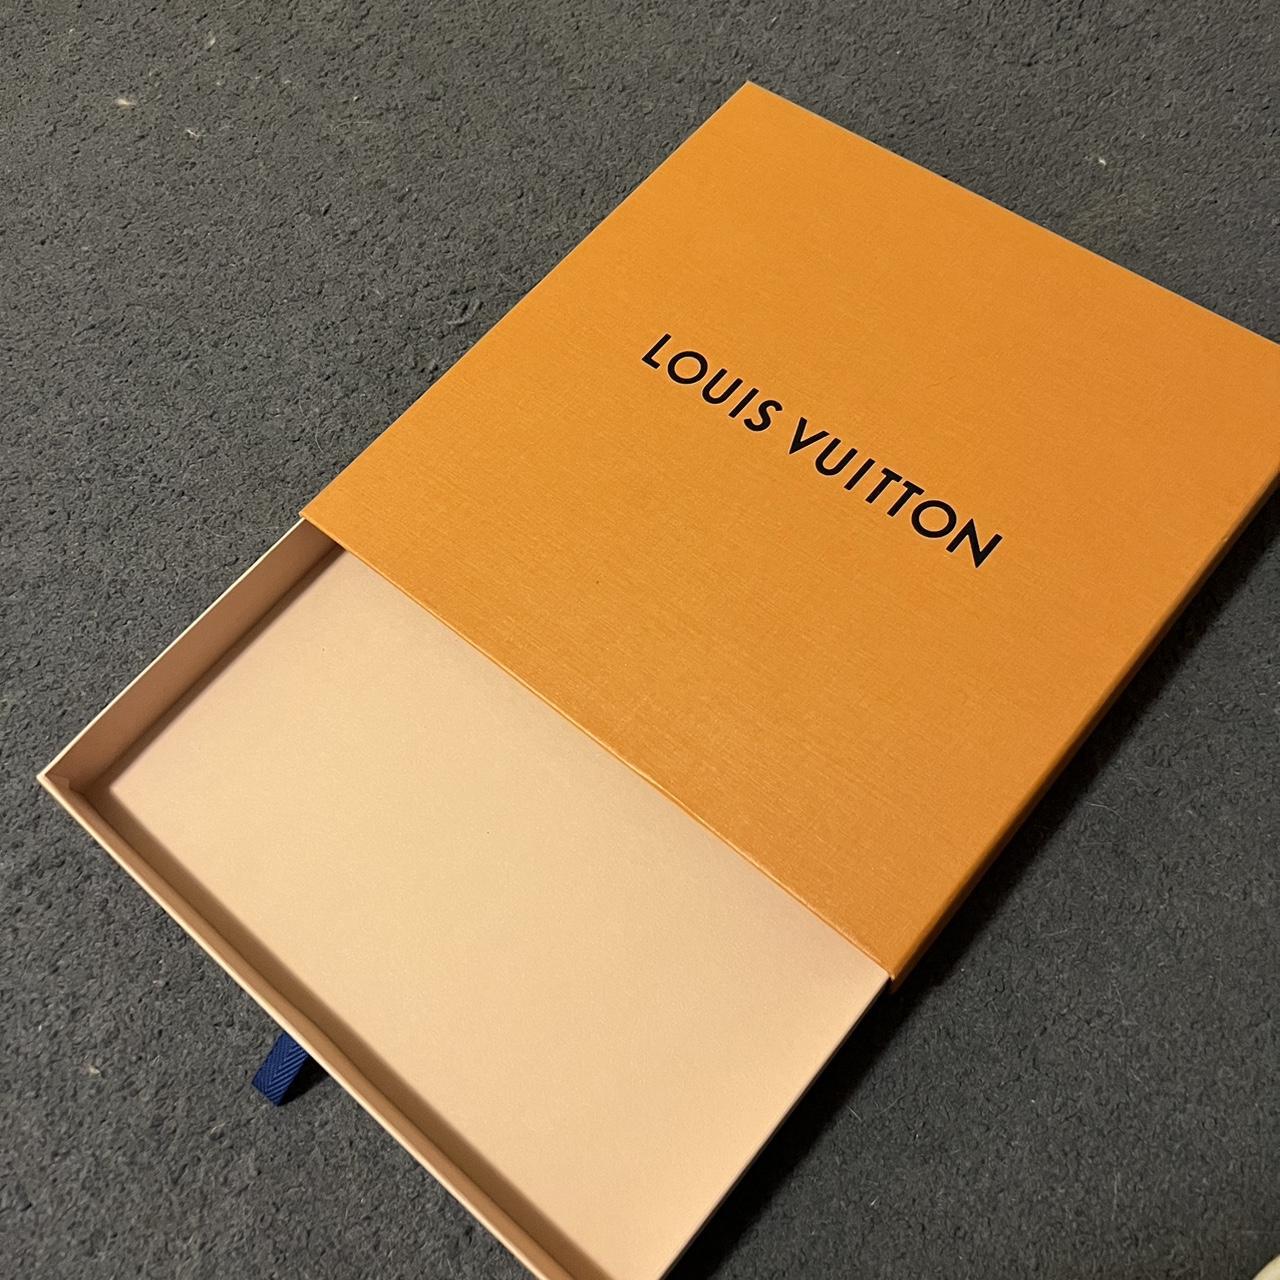 New Authentic LOUIS VUITTON LV Gift Box Magnetic Empty Box 10”x10”x5”